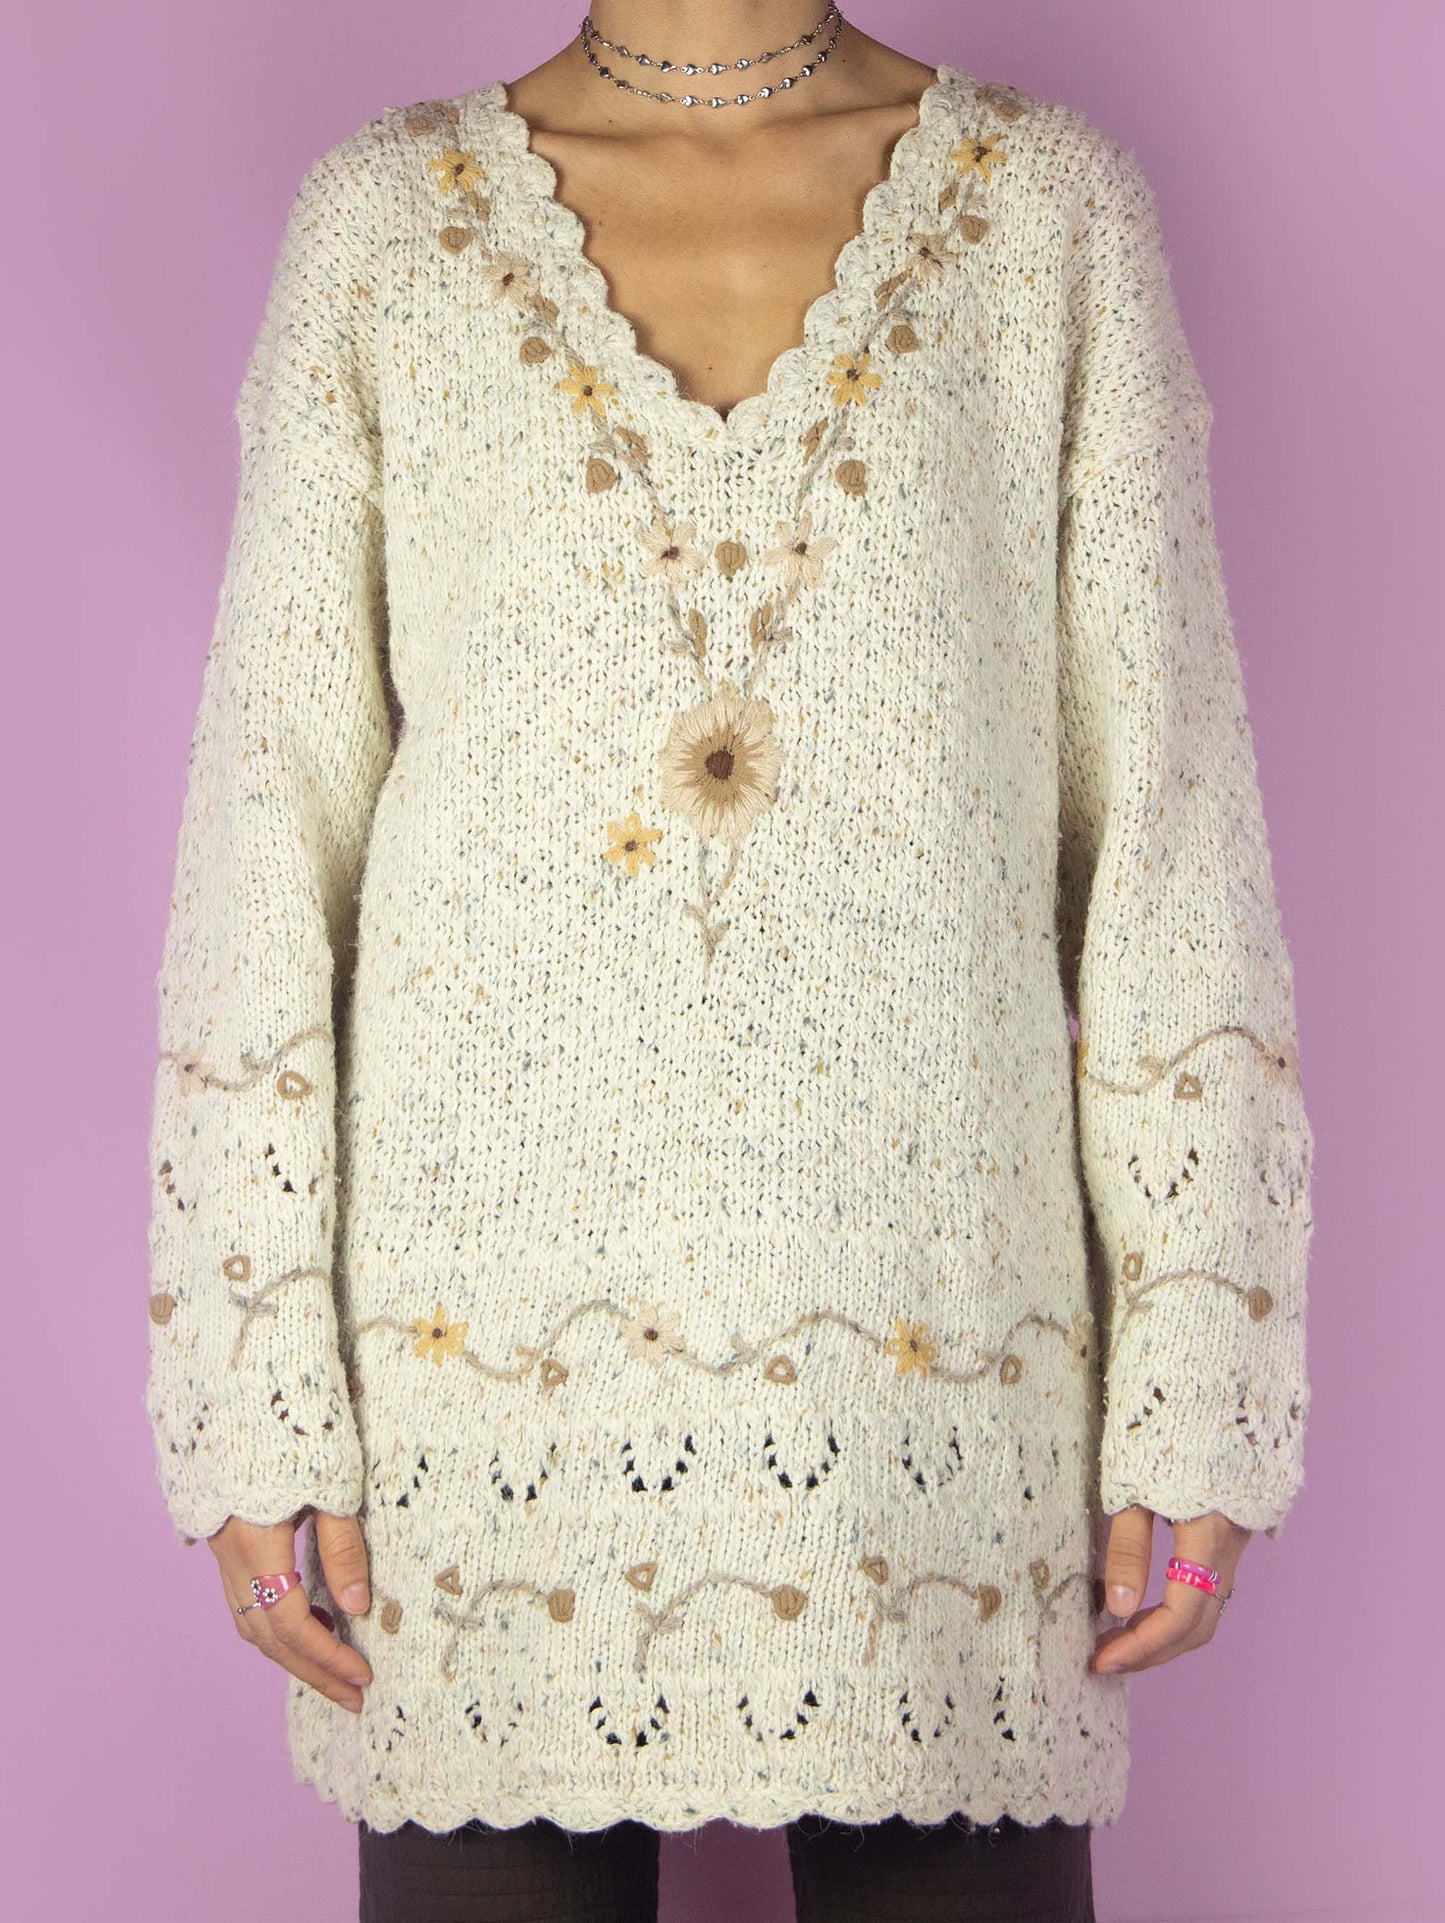 The Vintage 90s Floral Knit Sweater is a long beige V-neck sweater. Boho 1990s knitted pullover.